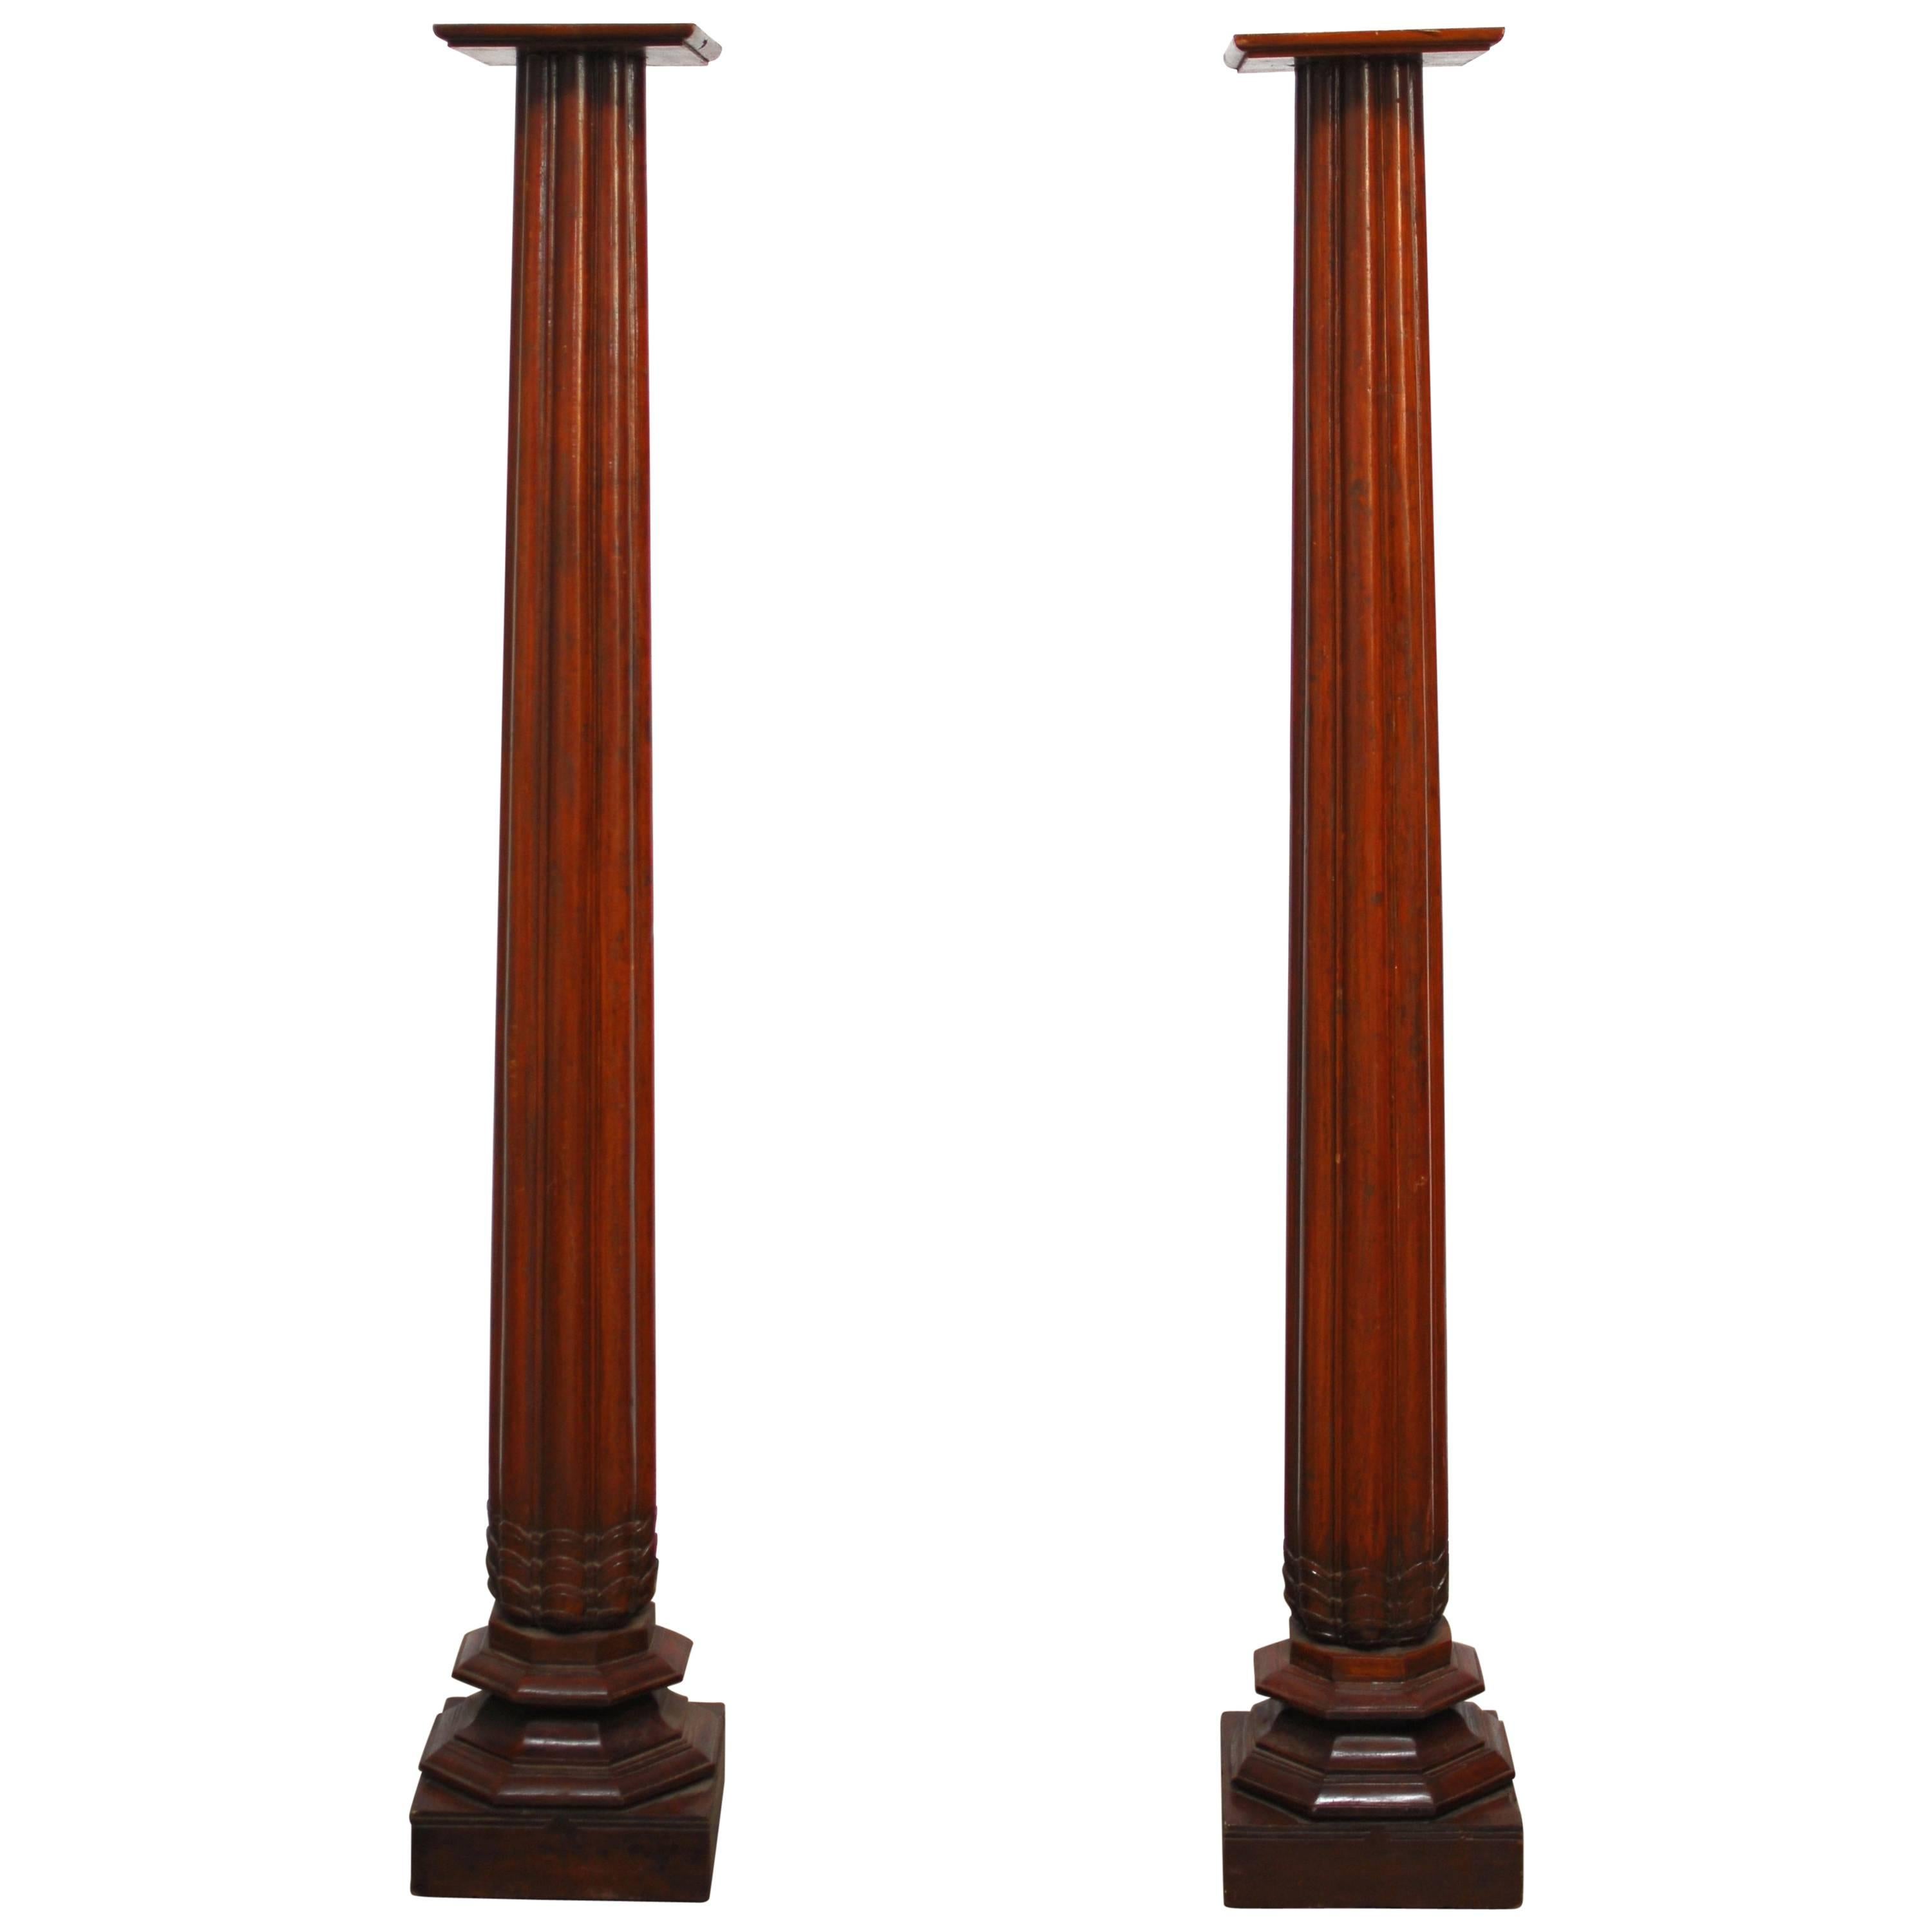 Anglo-Indian Teak Wood Architectural Columns 